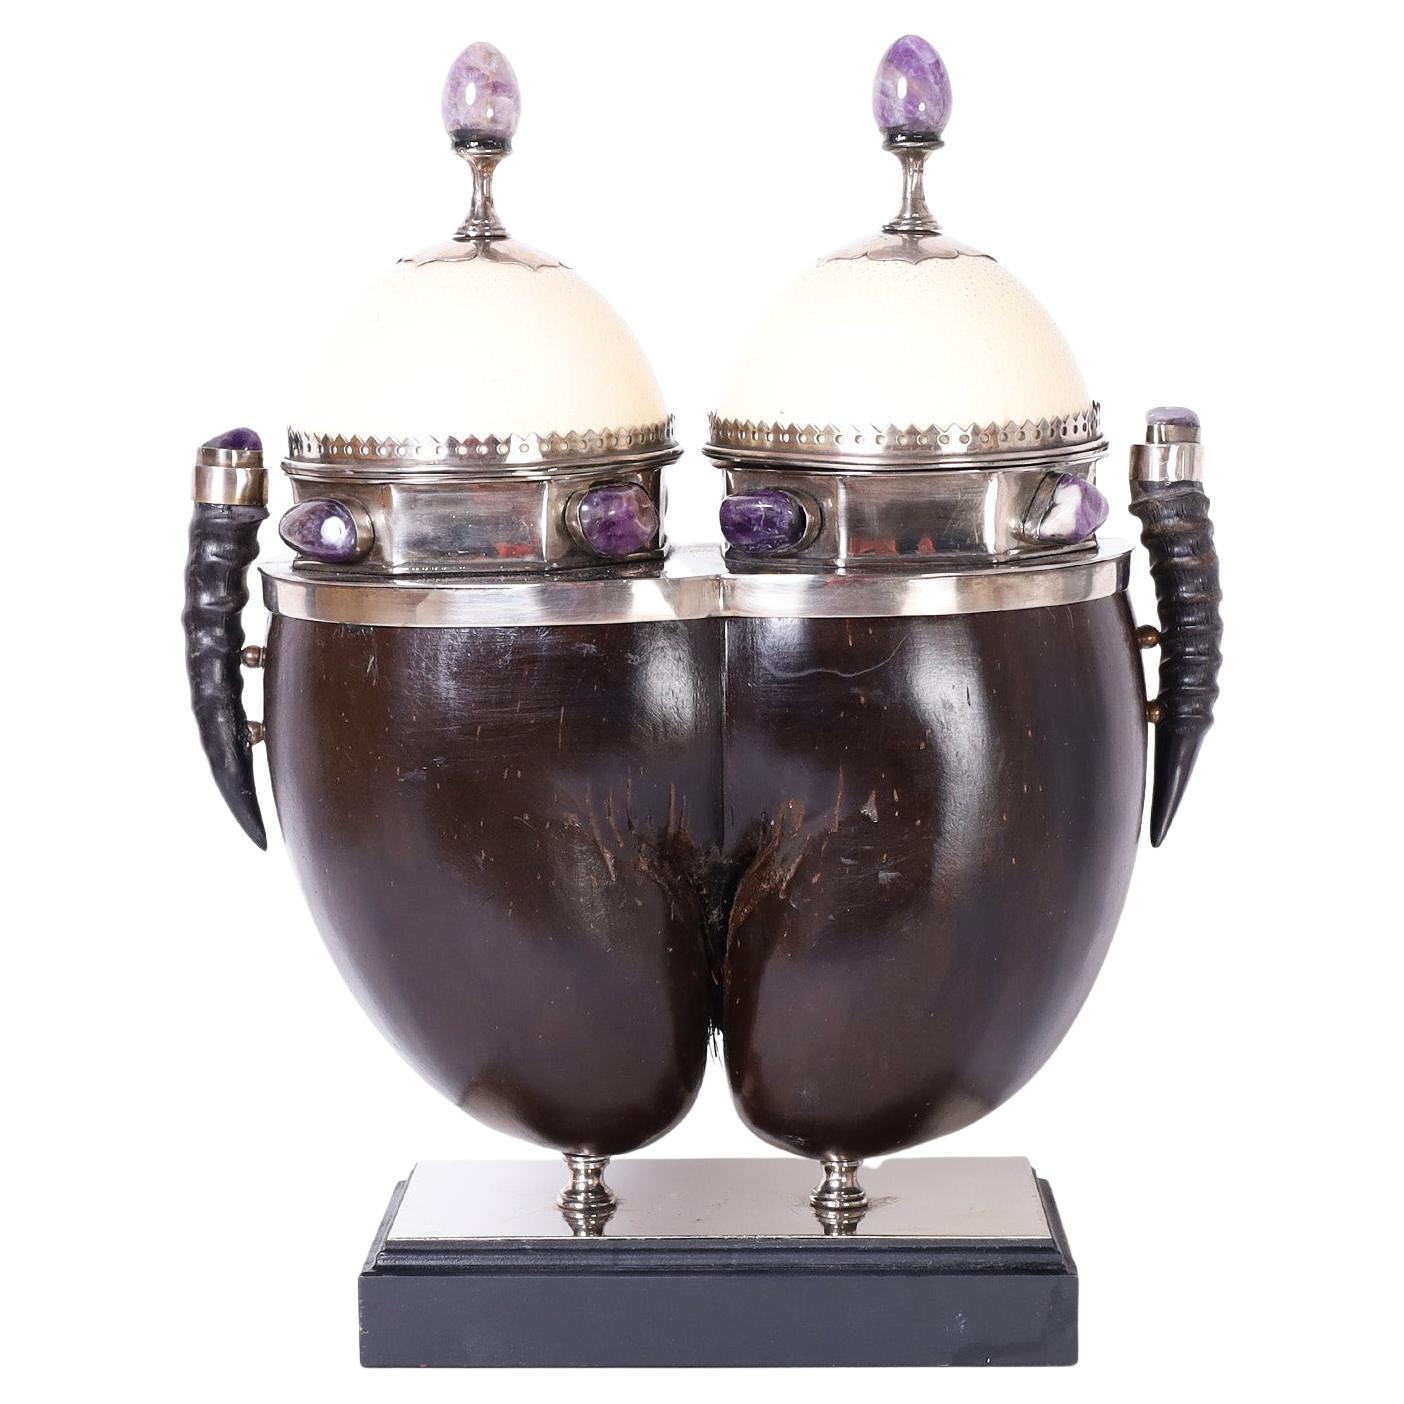 Rare and unusual tea caddy crafted from a coco de mer shell featuring amethyst stone handles and embellishments, ostrich egg tops with refined metal work, and antelope horn side handles. Stamped Redmile London under a lid.